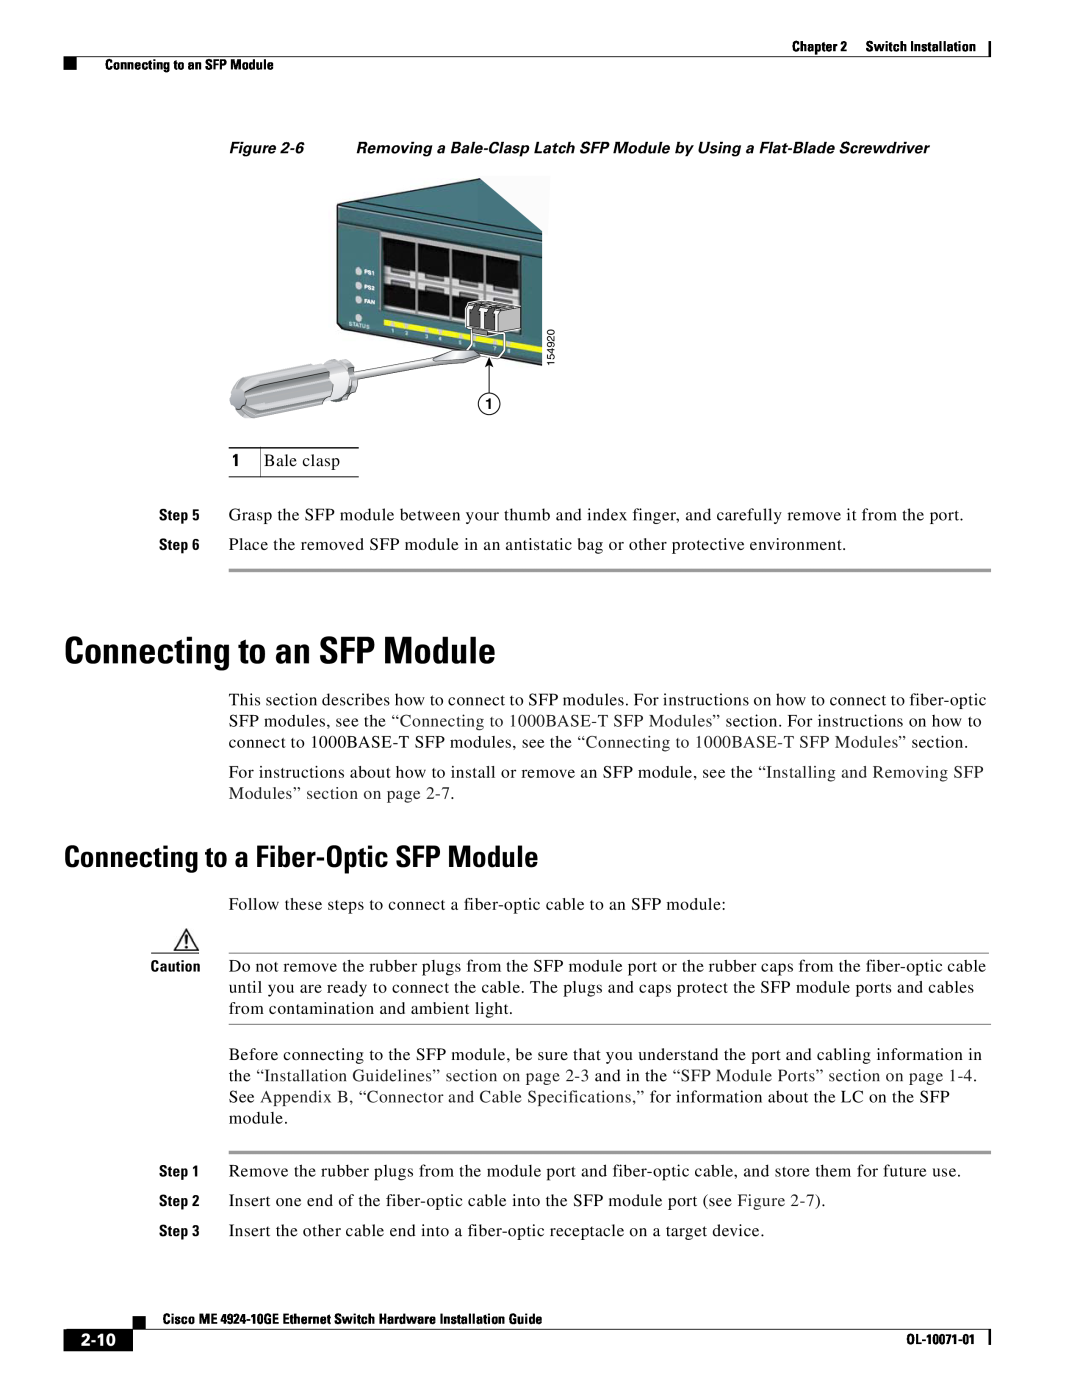 Cisco Systems ME 4924-10GE manual Connecting to an SFP Module, Connecting to a Fiber-Optic SFP Module, 2-10 